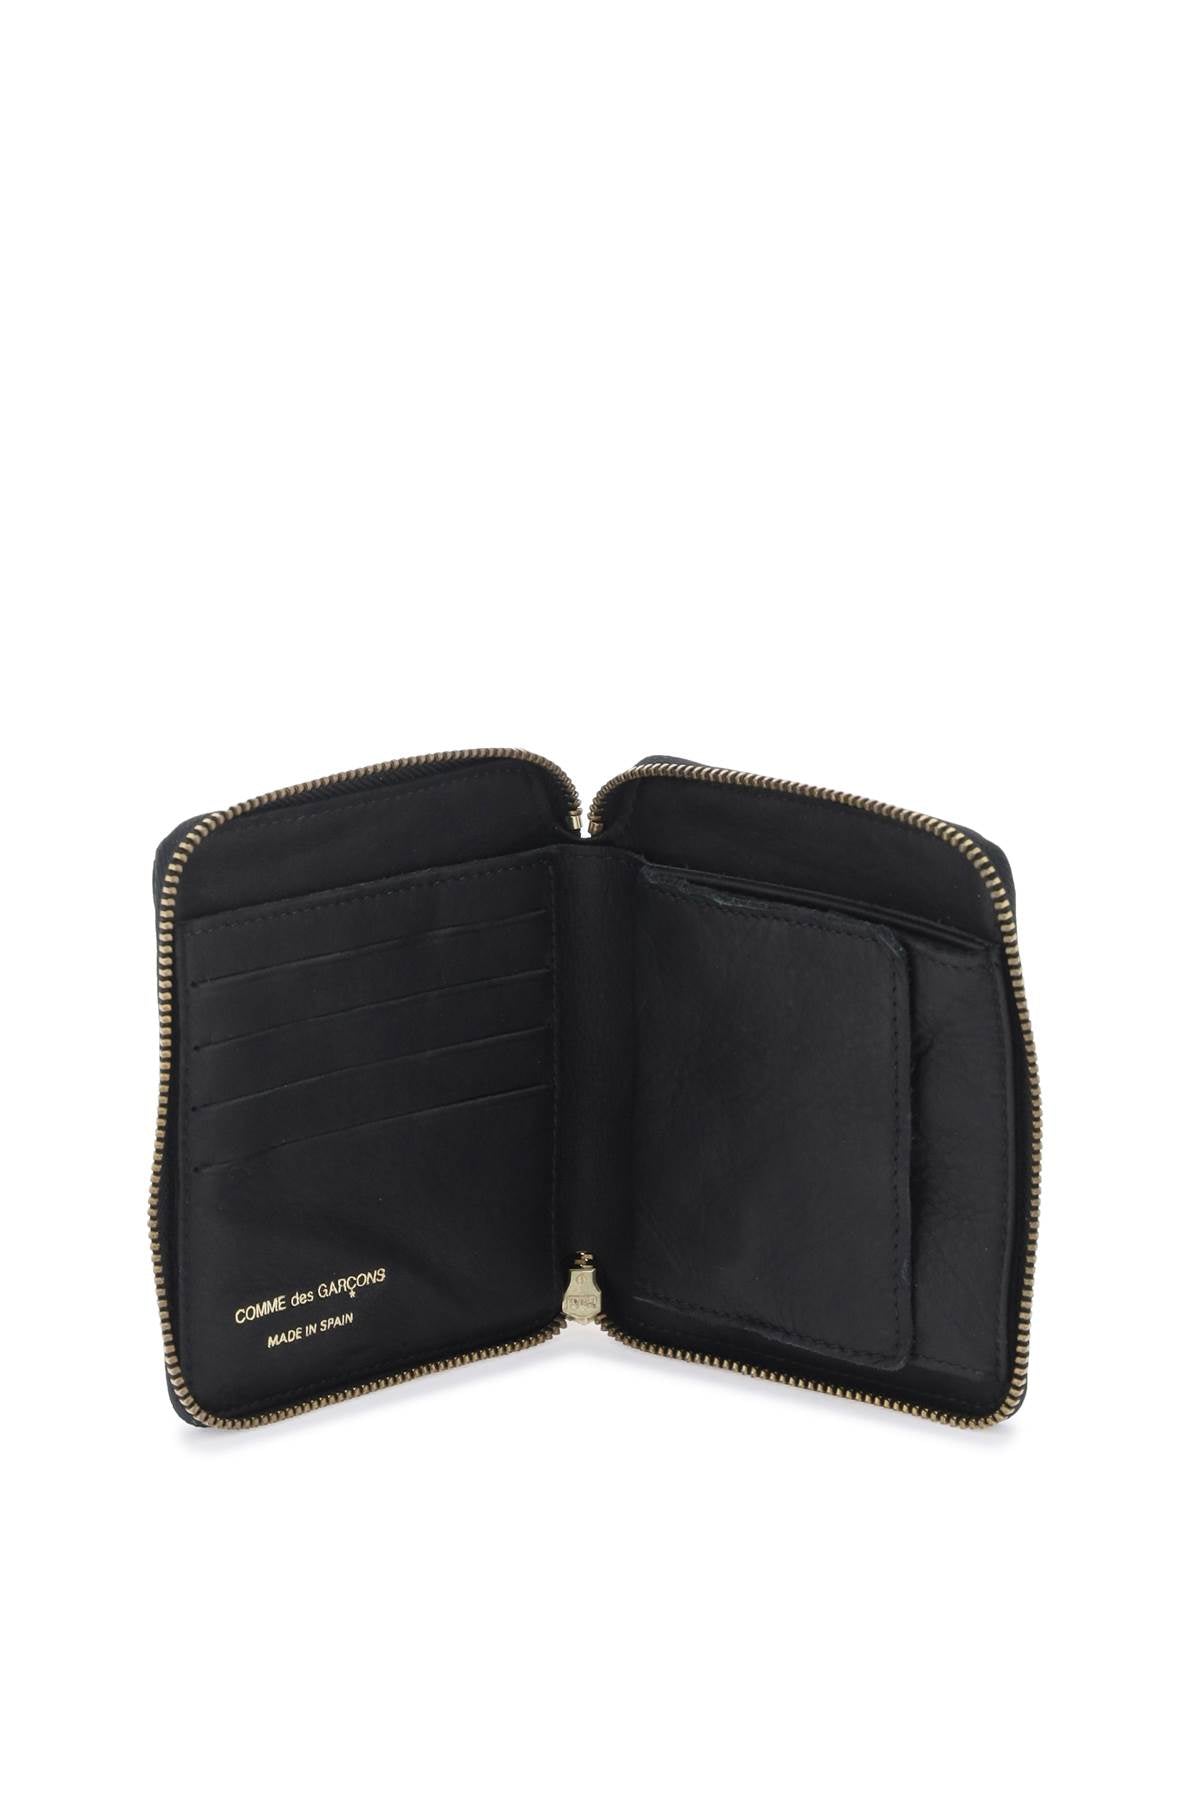 Comme des garcons wallet washed leather zip-around wallet-1